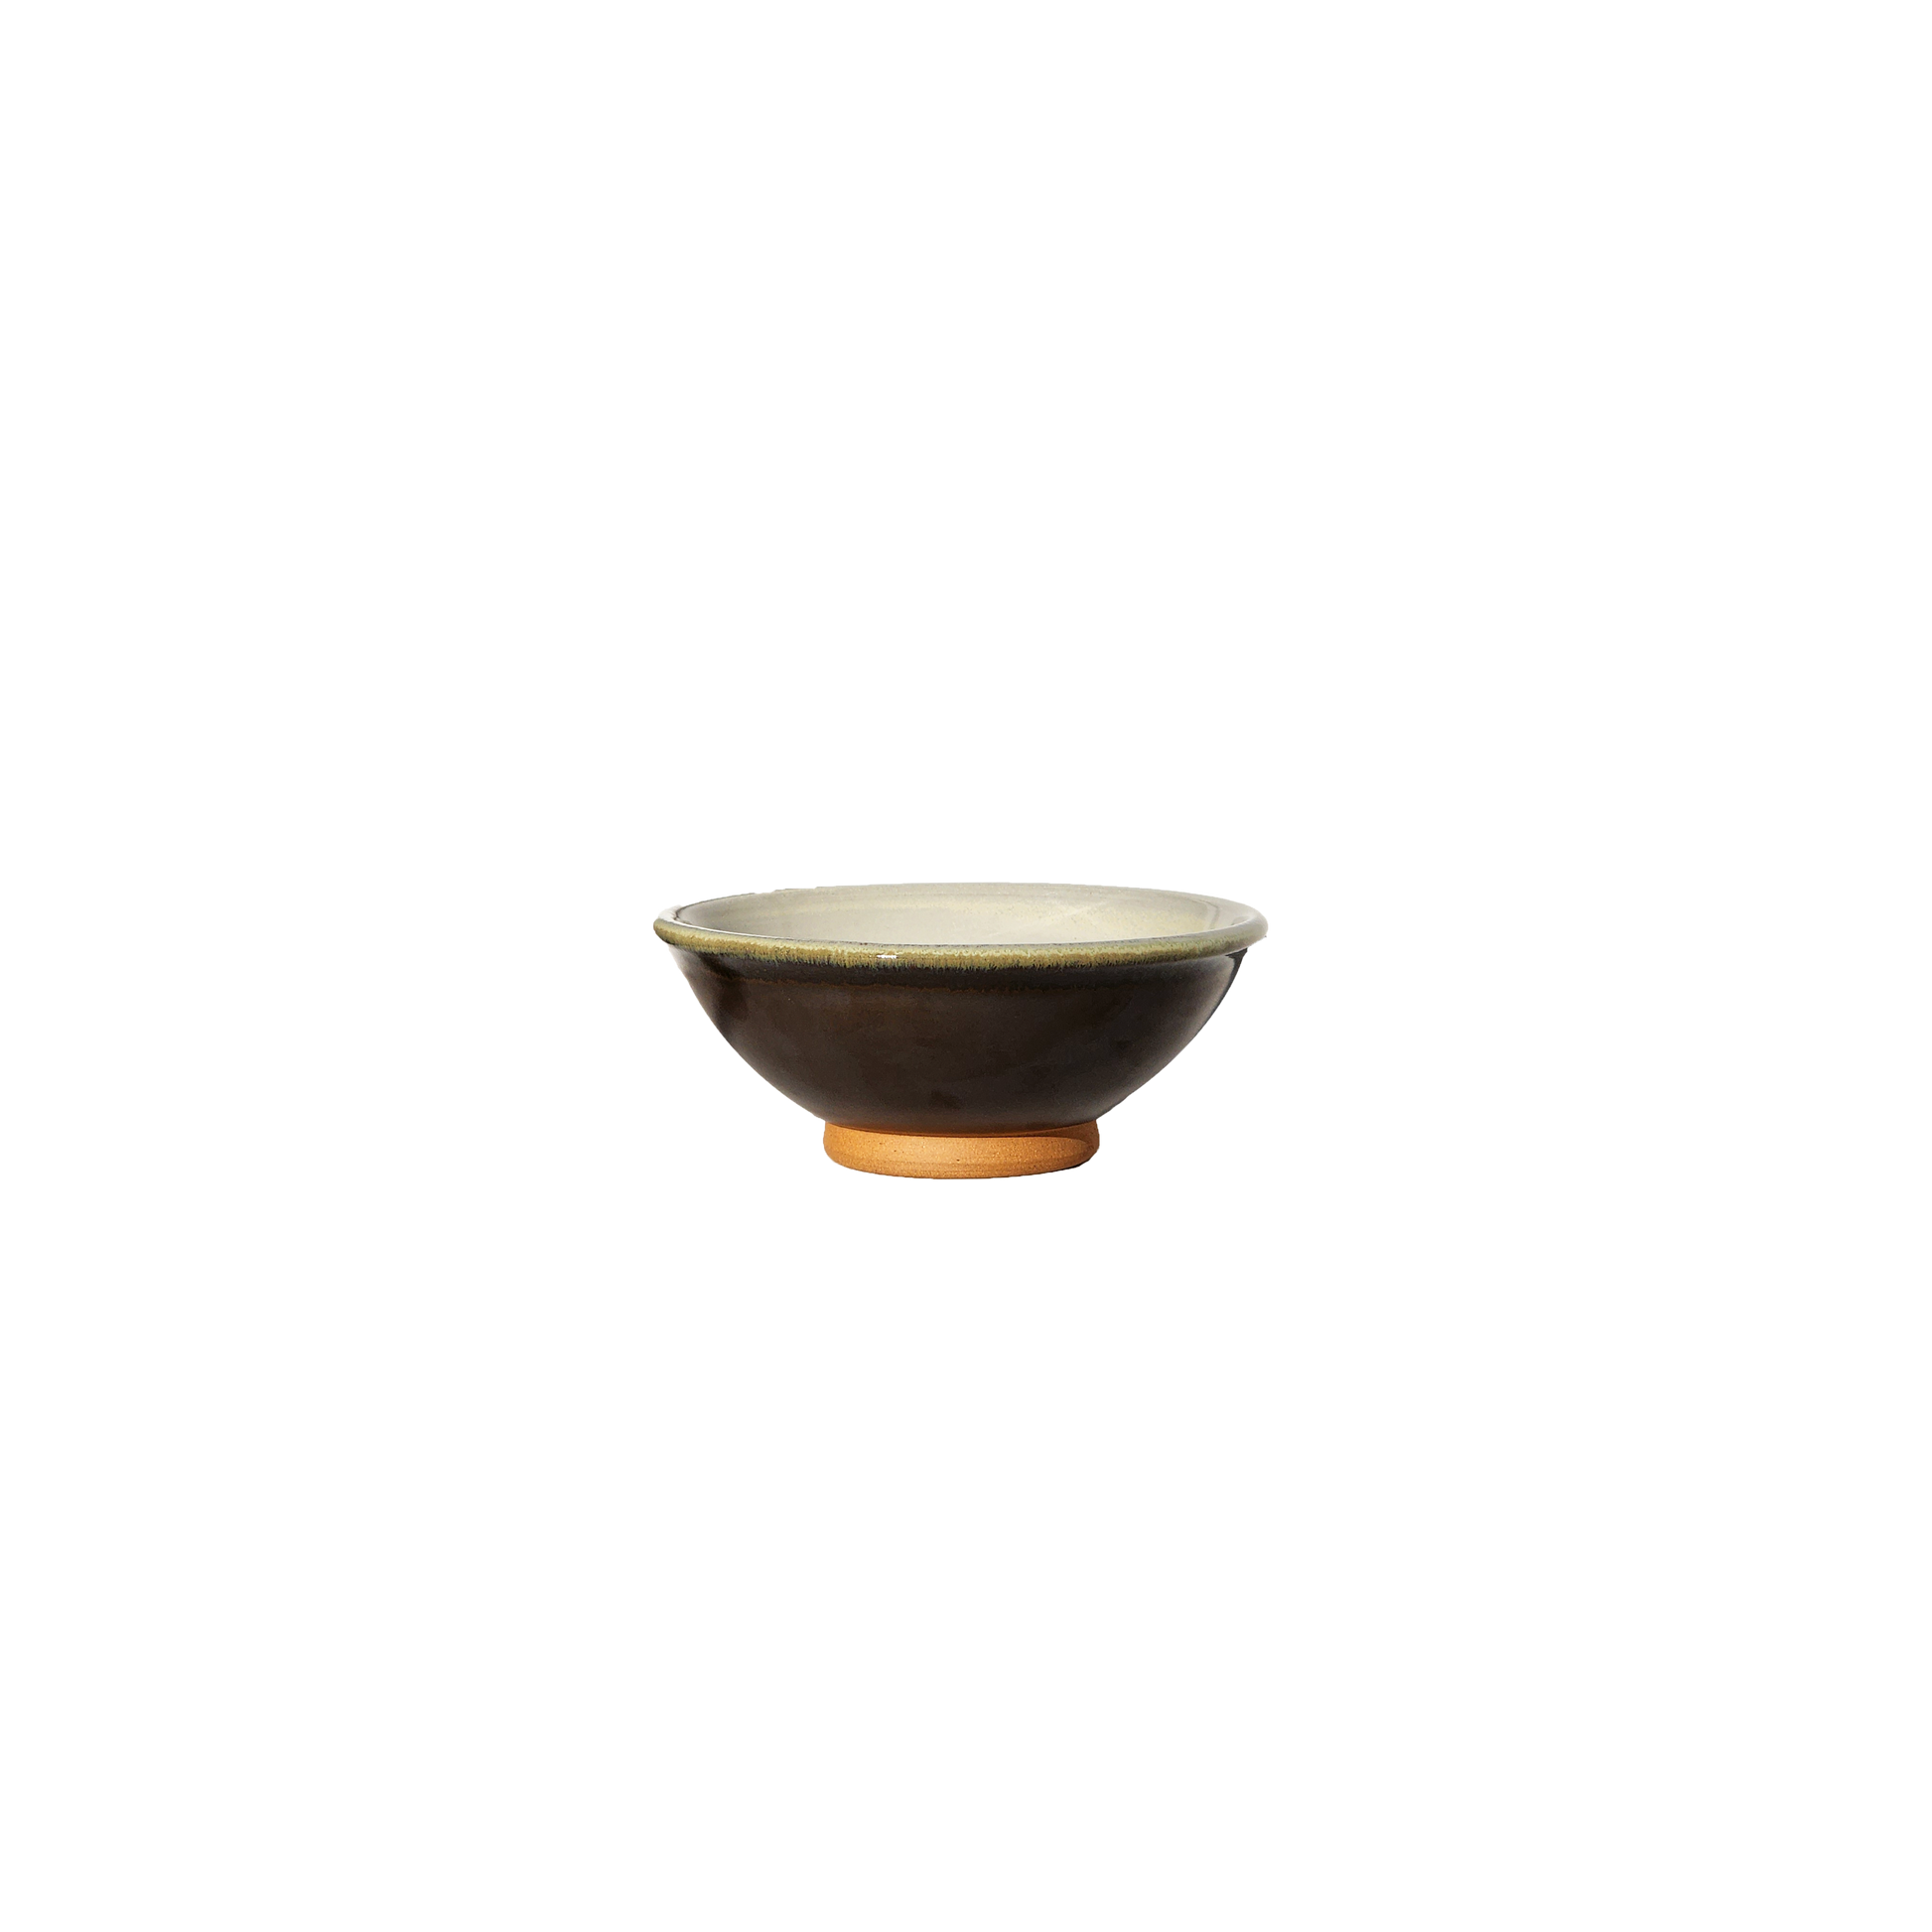 Image: Add a touch of sophistication to your table with this licorice sugar bowl. Holds 4 ounces of sugar, providing a stylish solution for sweetening your tea or coffee.